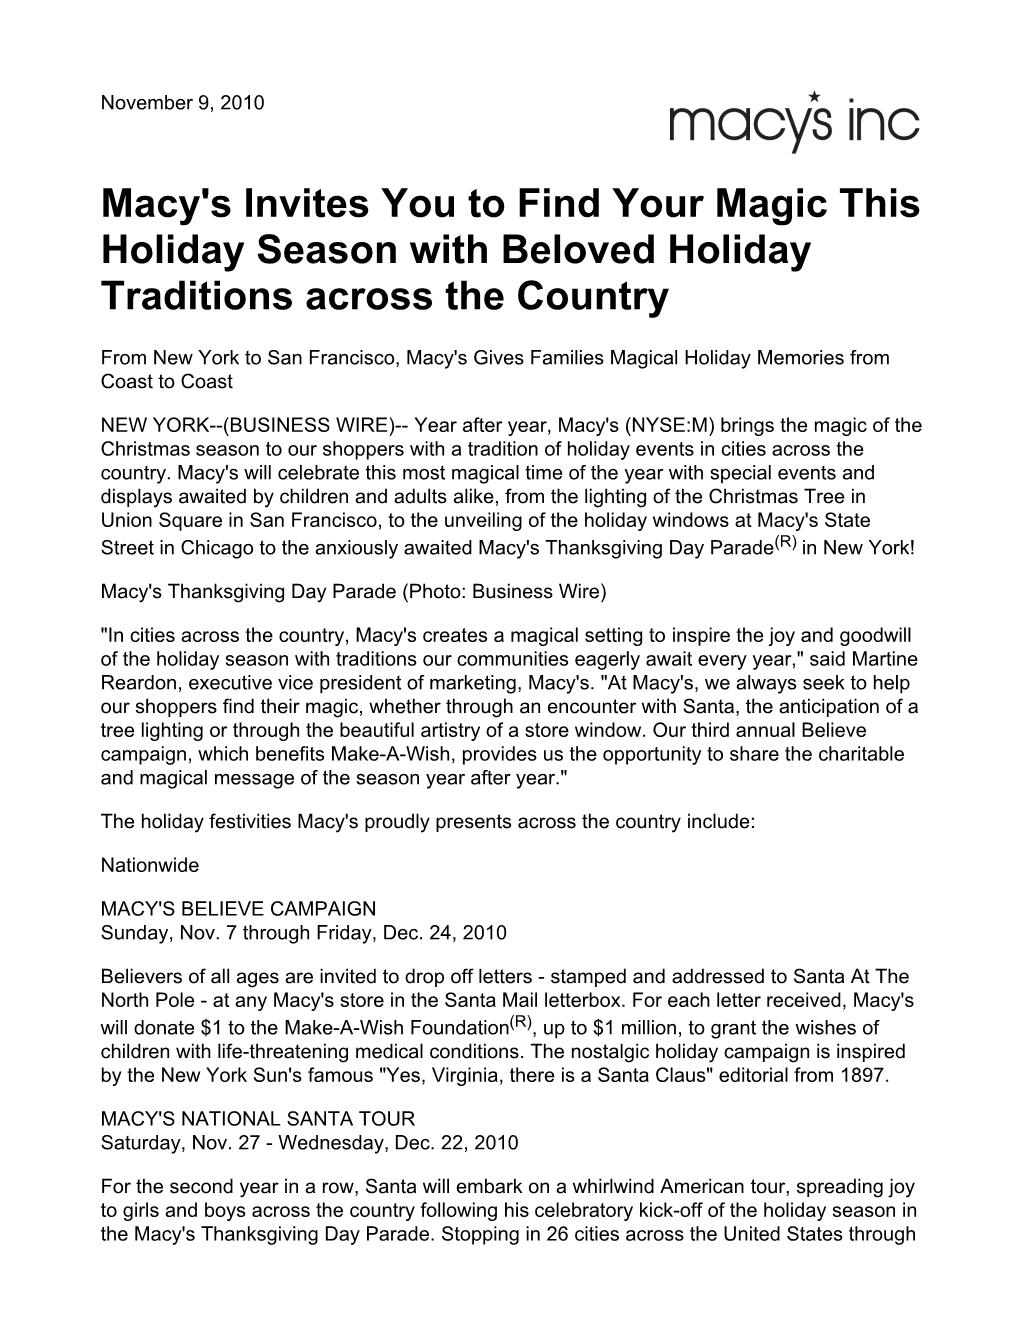 Macy's Invites You to Find Your Magic This Holiday Season with Beloved Holiday Traditions Across the Country